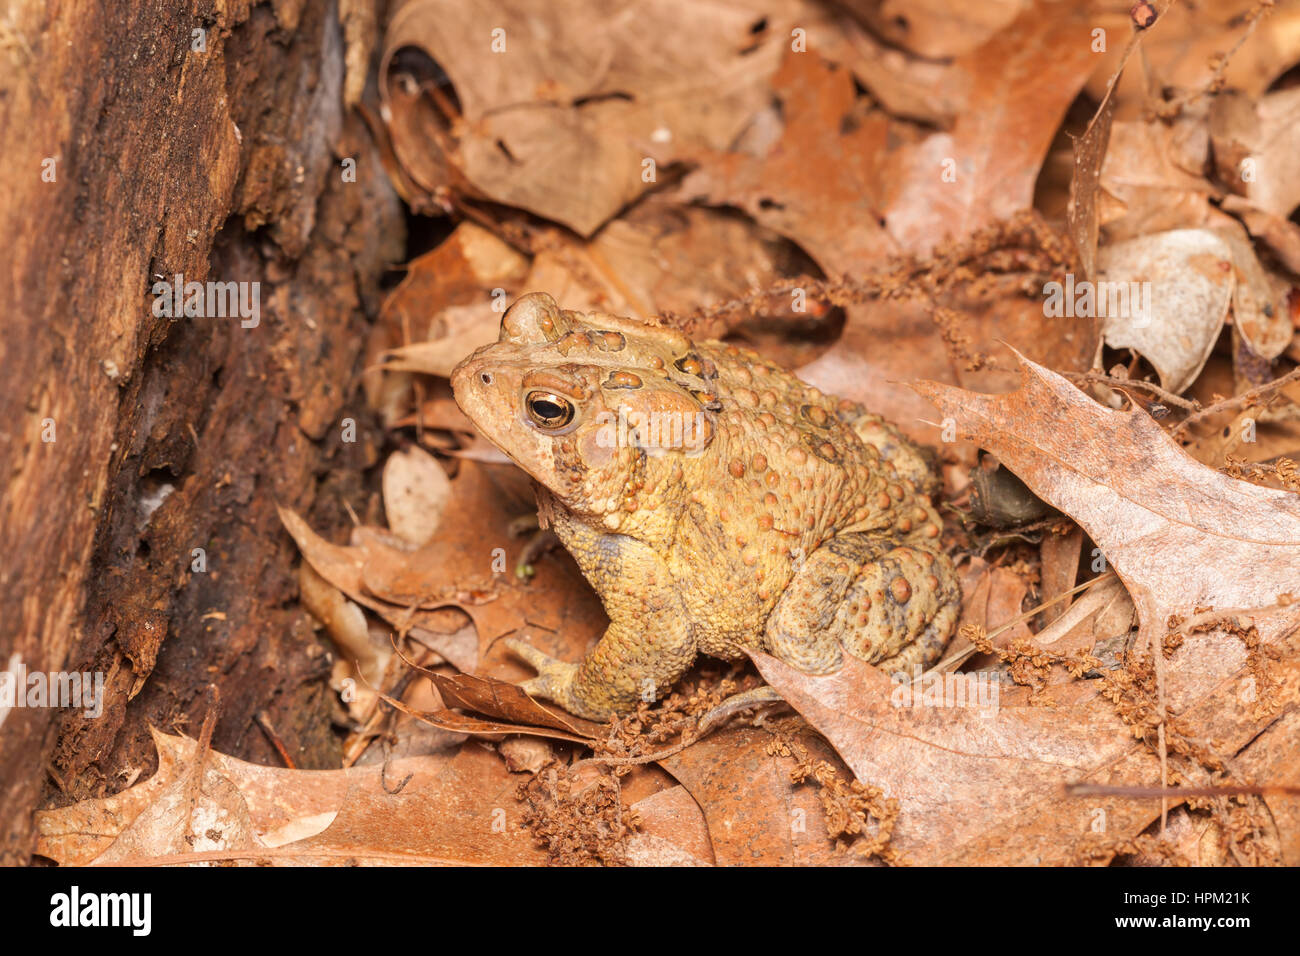 An American Toad, subspecies Eastern American Toad (Anaxyrus americanus americanus), sits among dead leaves on the ground in a woodlands habitat. Stock Photo